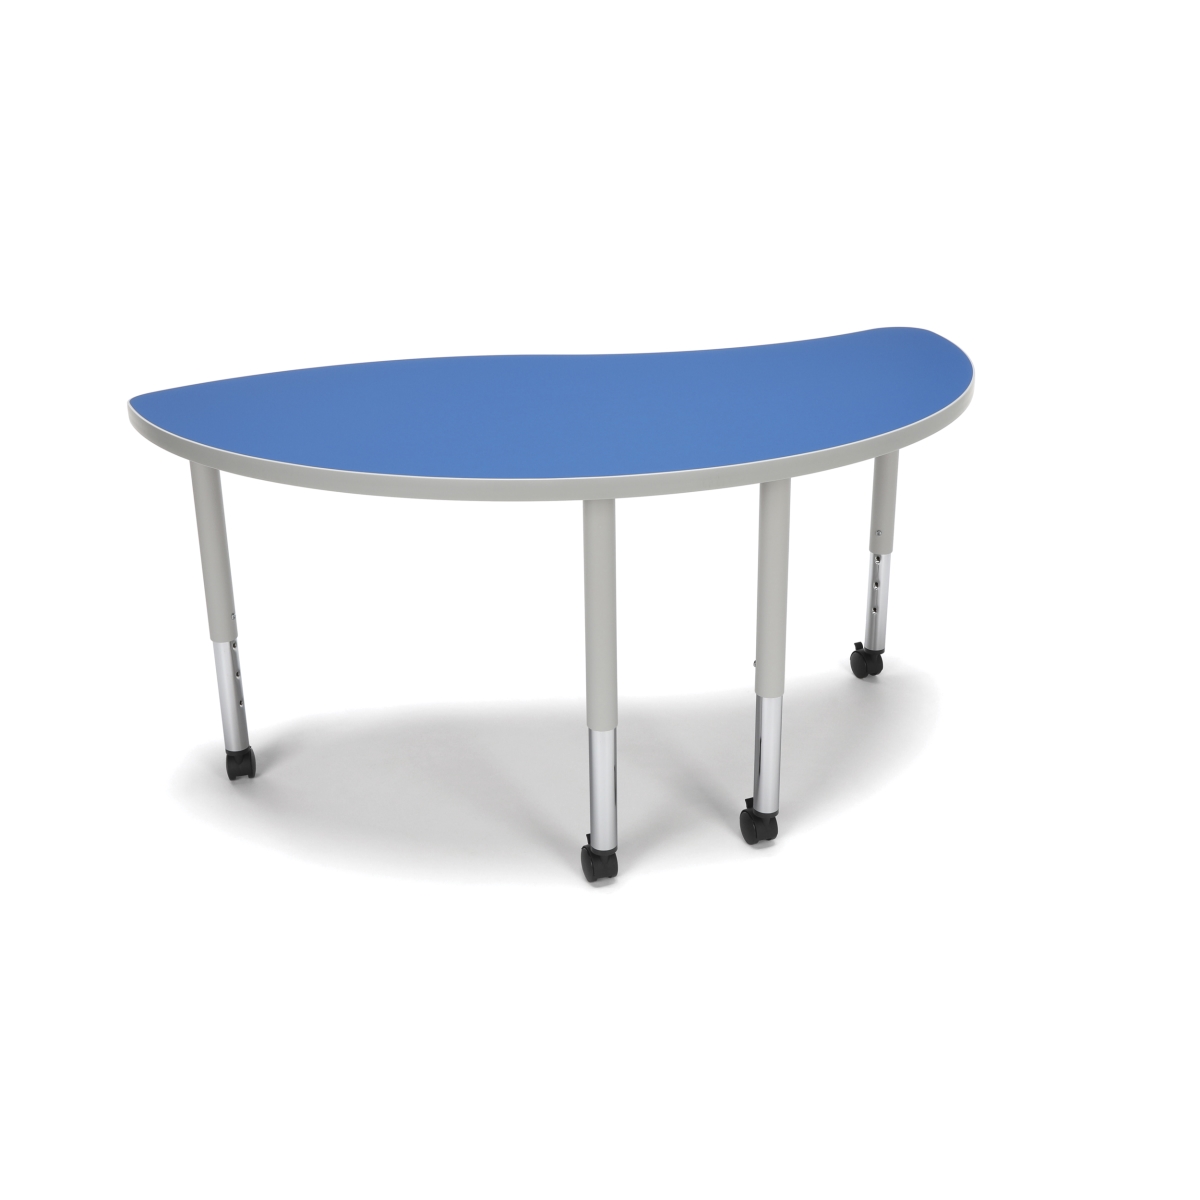 Ying-slc-blu Adapt Series Ying Student Table - 20-28 In. Height Adjustable Desk With Casters, Blue